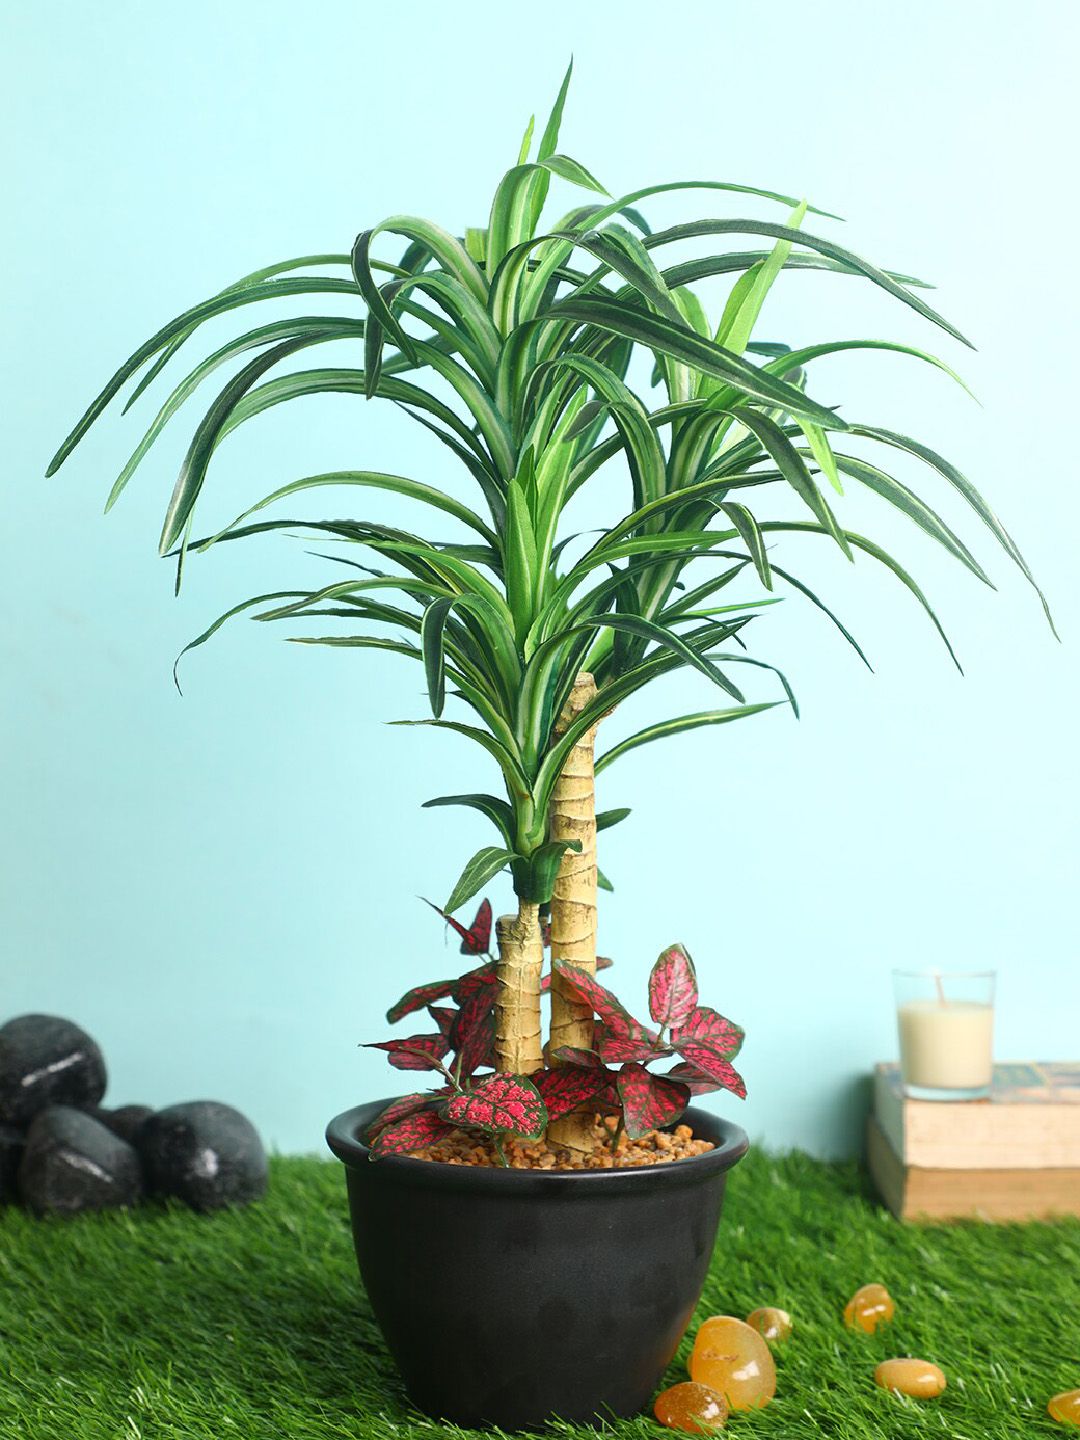 PolliNation Green & Black Stunning Artificial Yucca Bonsai with Ceramic Pot Price in India